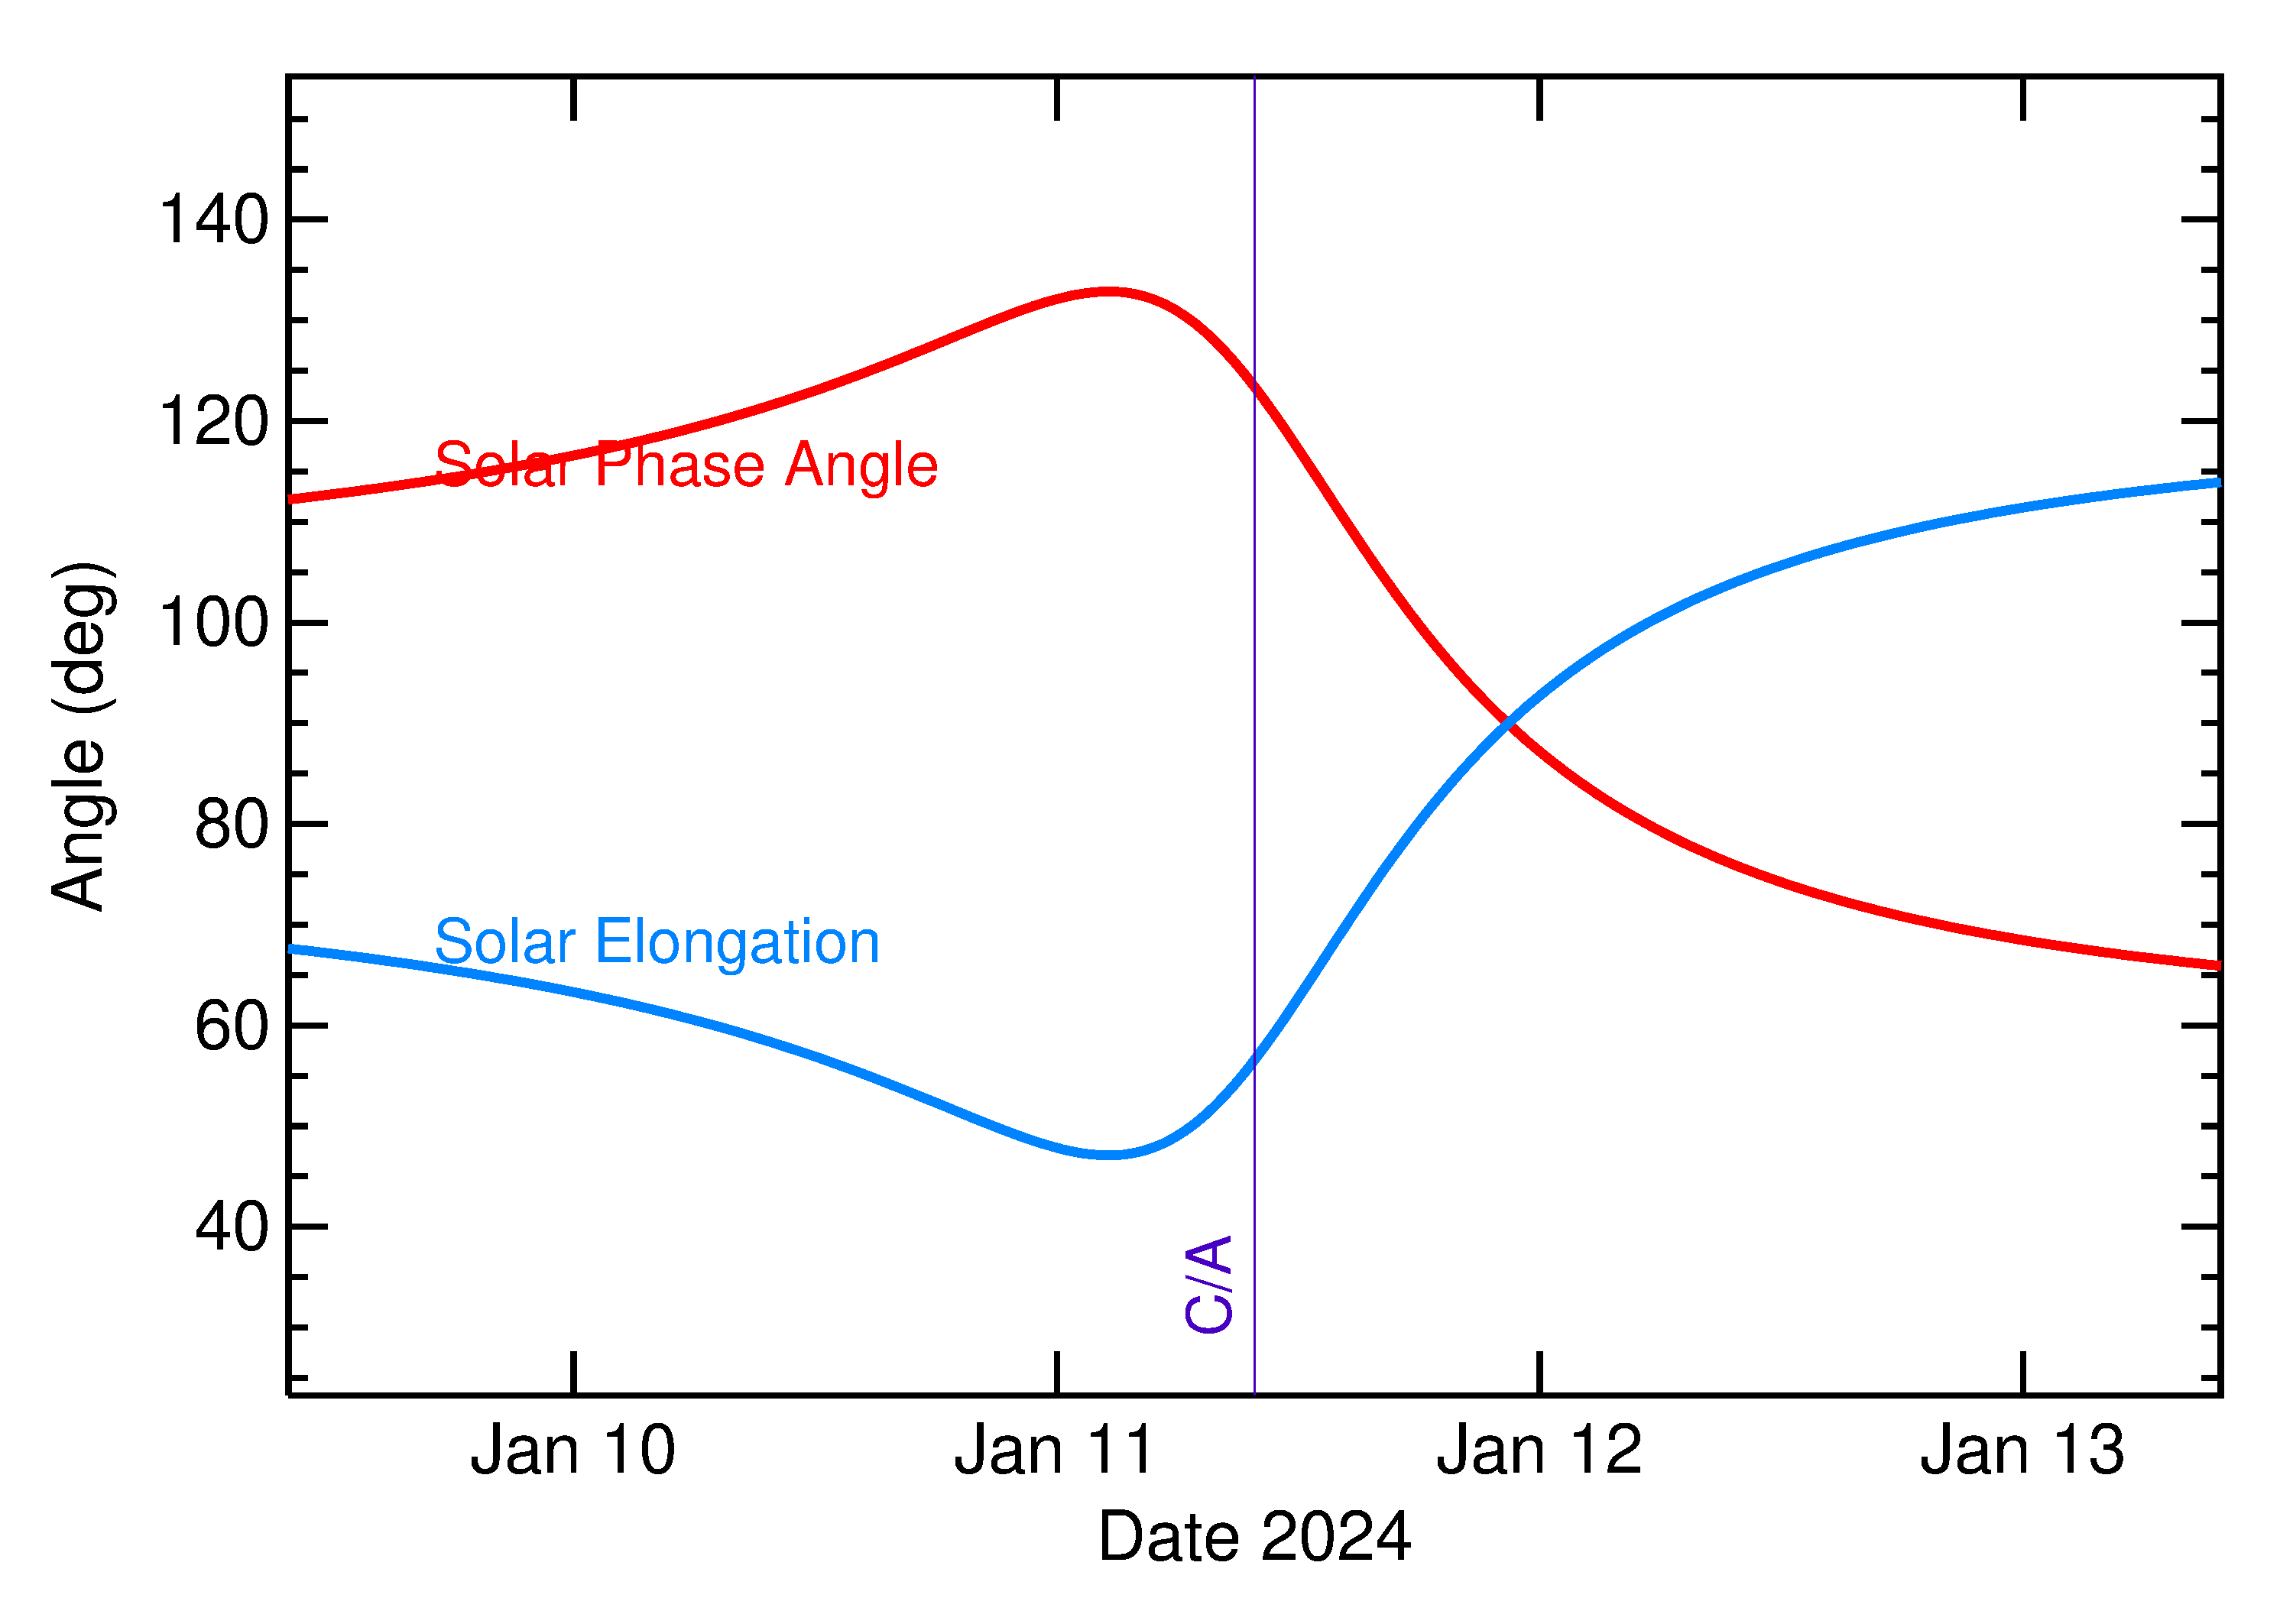 Solar Elongation and Solar Phase Angle of 2024 AM4 in the days around closest approach